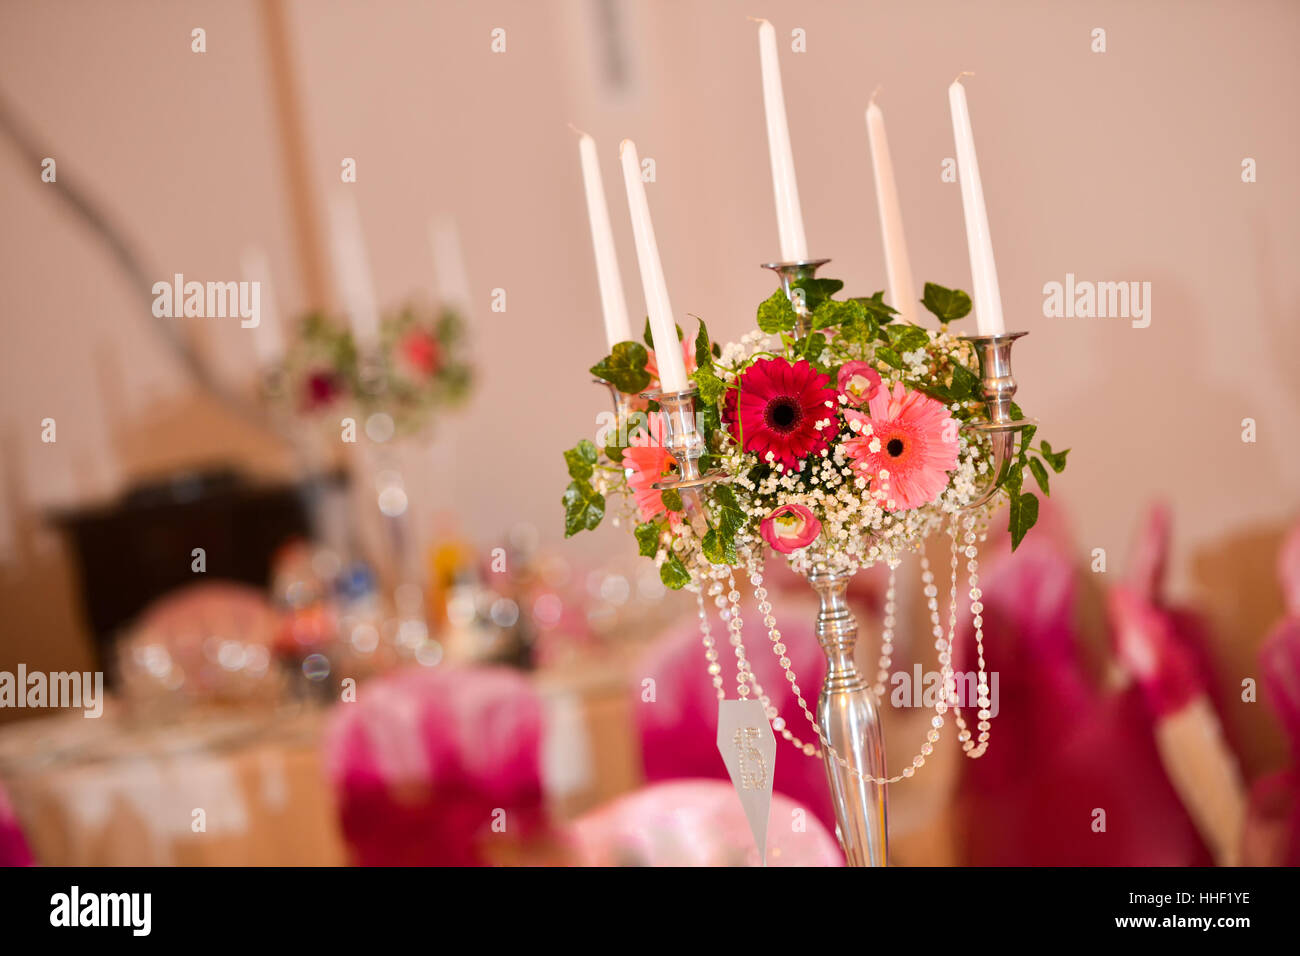 Support for candles with flowers on the table in natural light Stock Photo